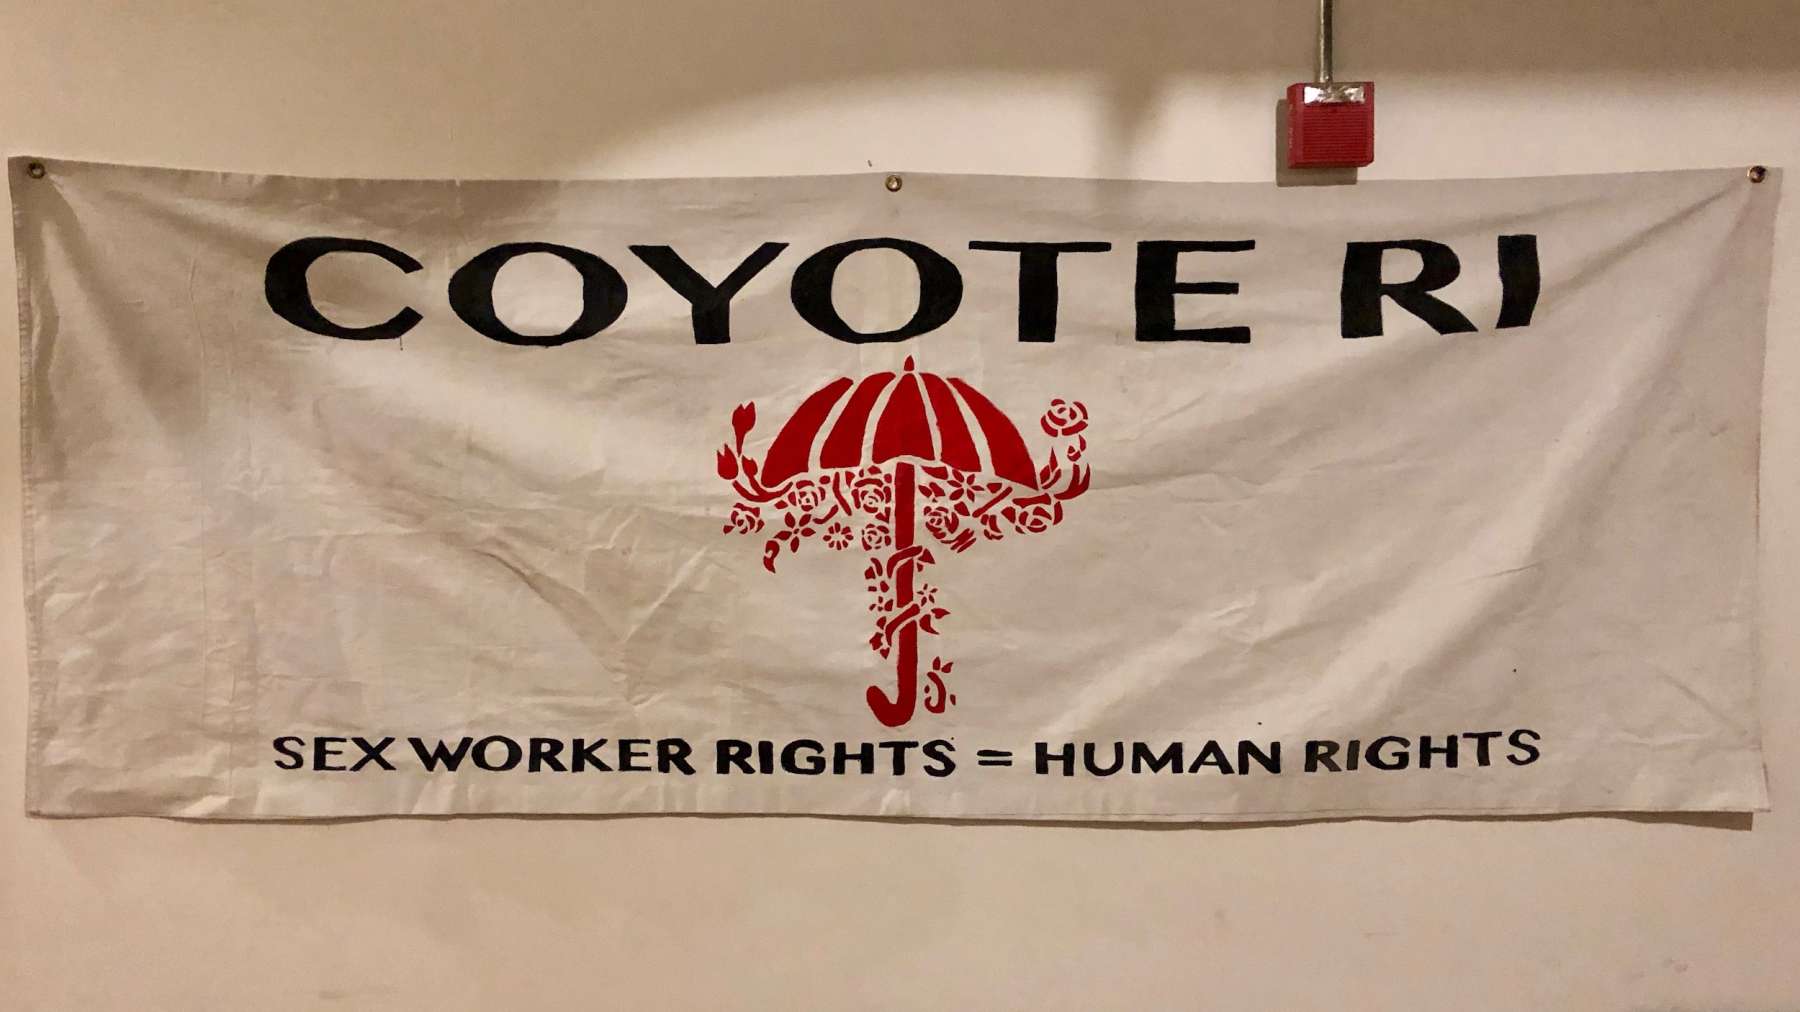 COYOTE RI observes the International Day to End Violence Against Sex Workers